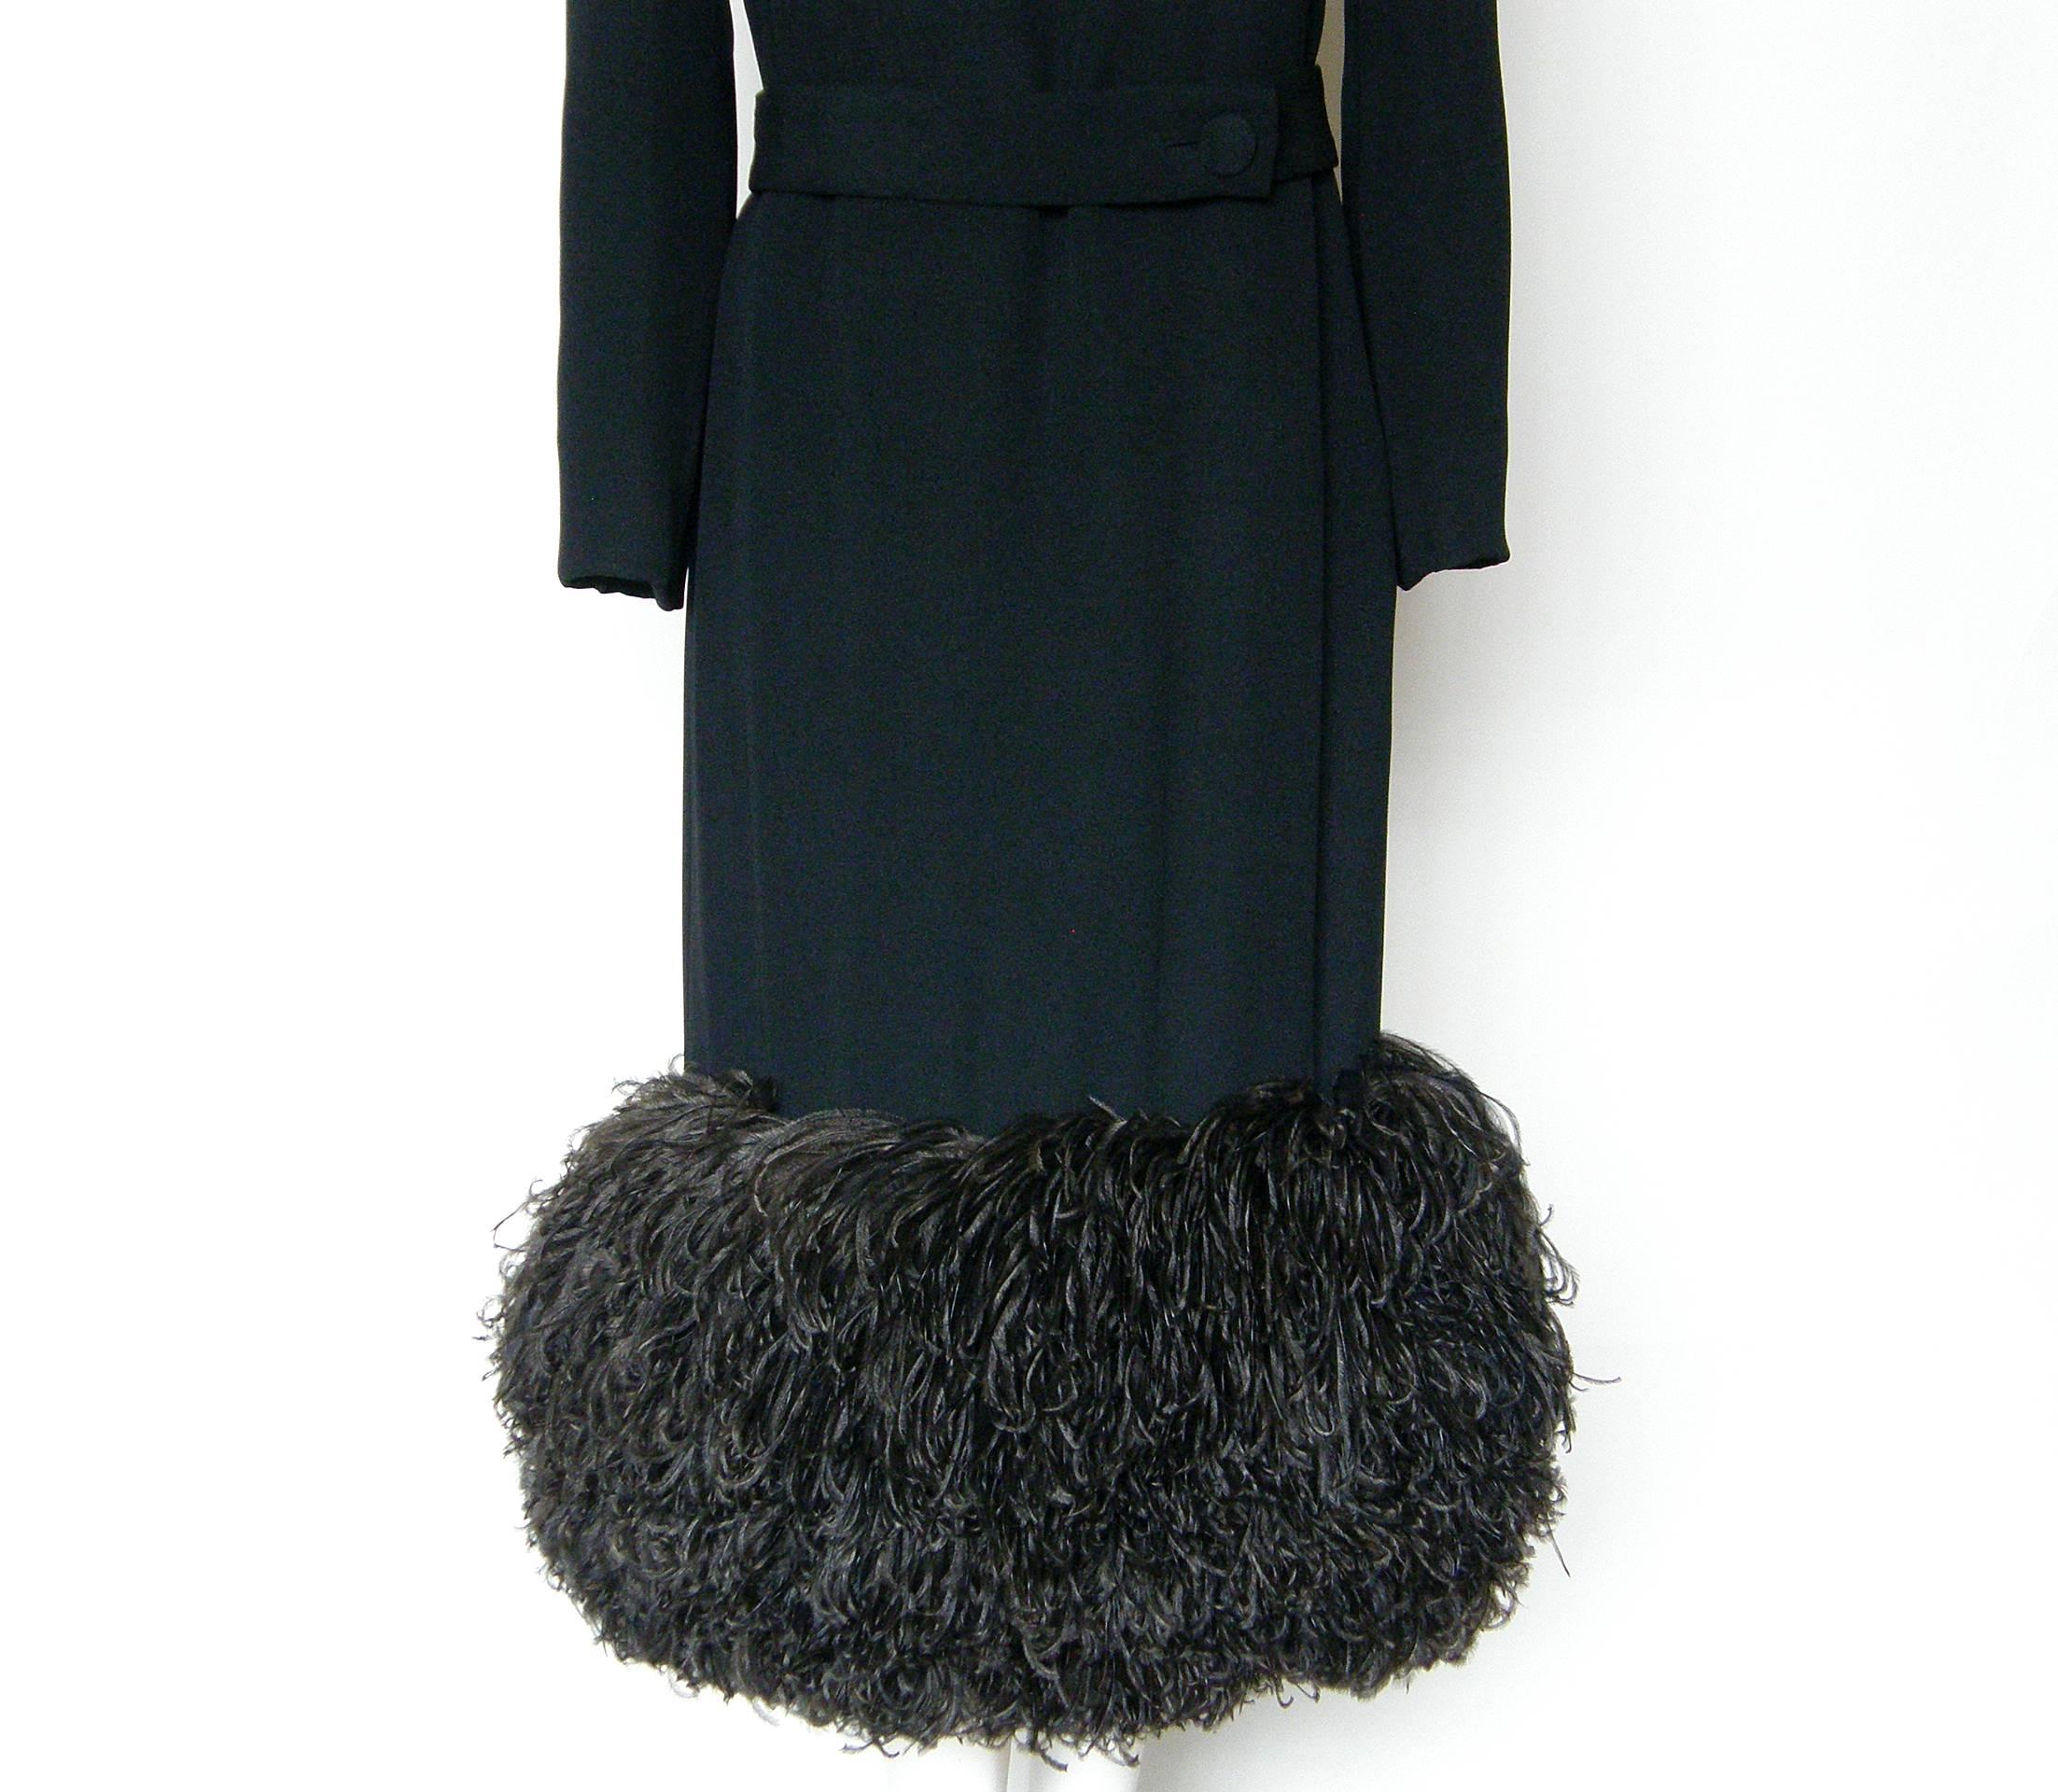 Norman Norell Evening Dress with Ostrich Feathers 2